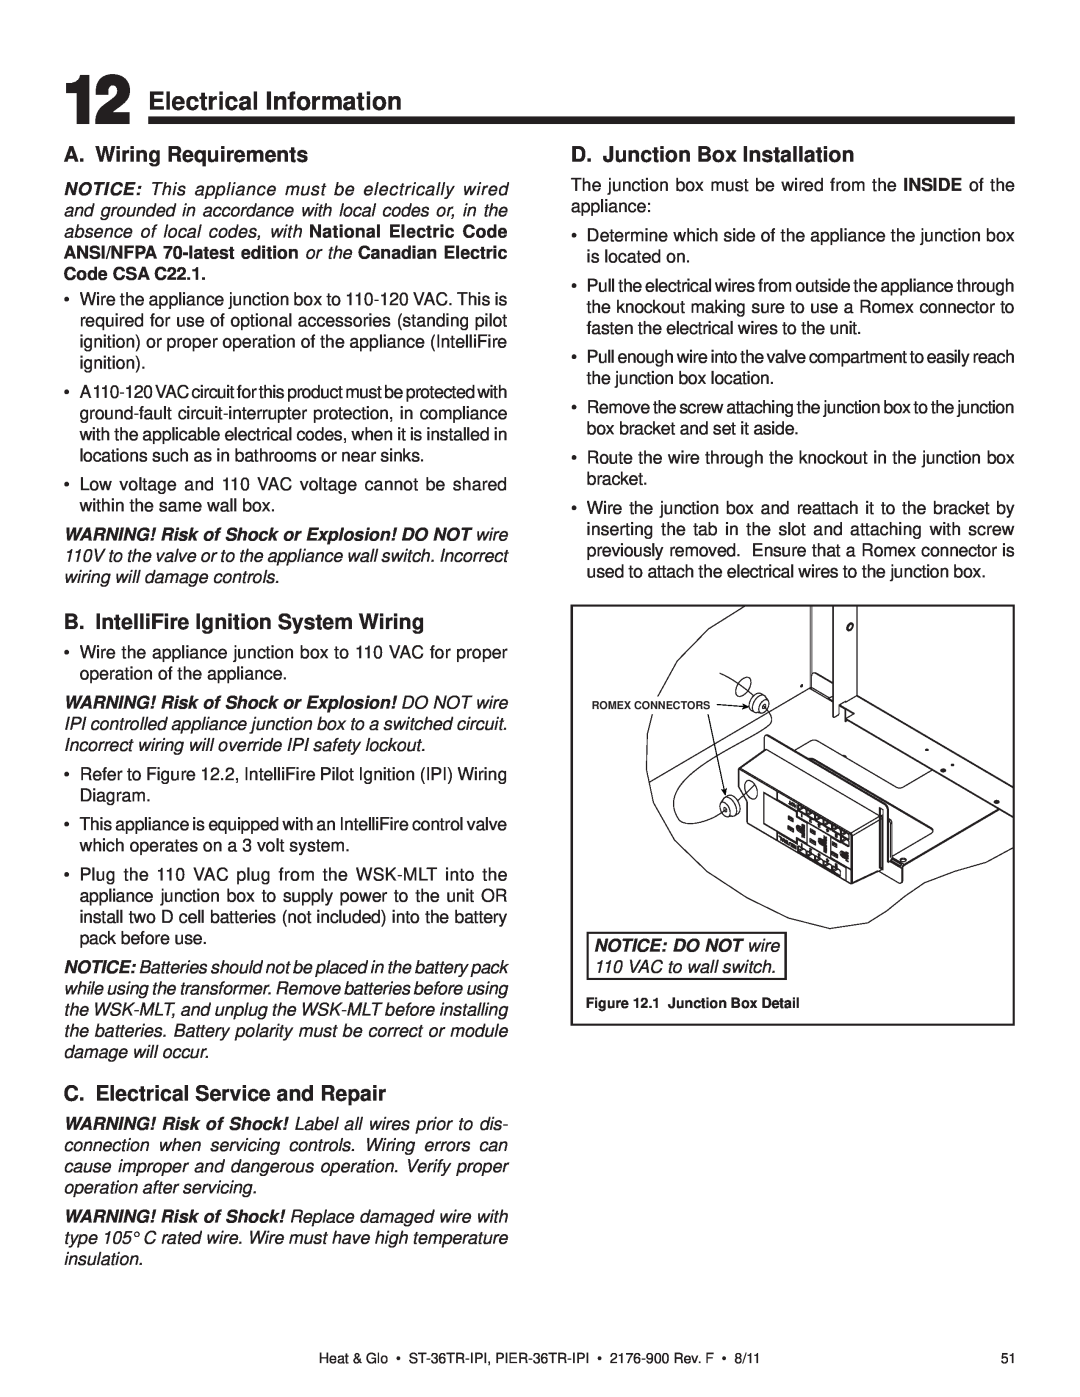 Heat & Glo LifeStyle ST-36TR-IPI owner manual Electrical Information, A. Wiring Requirements, D. Junction Box Installation 